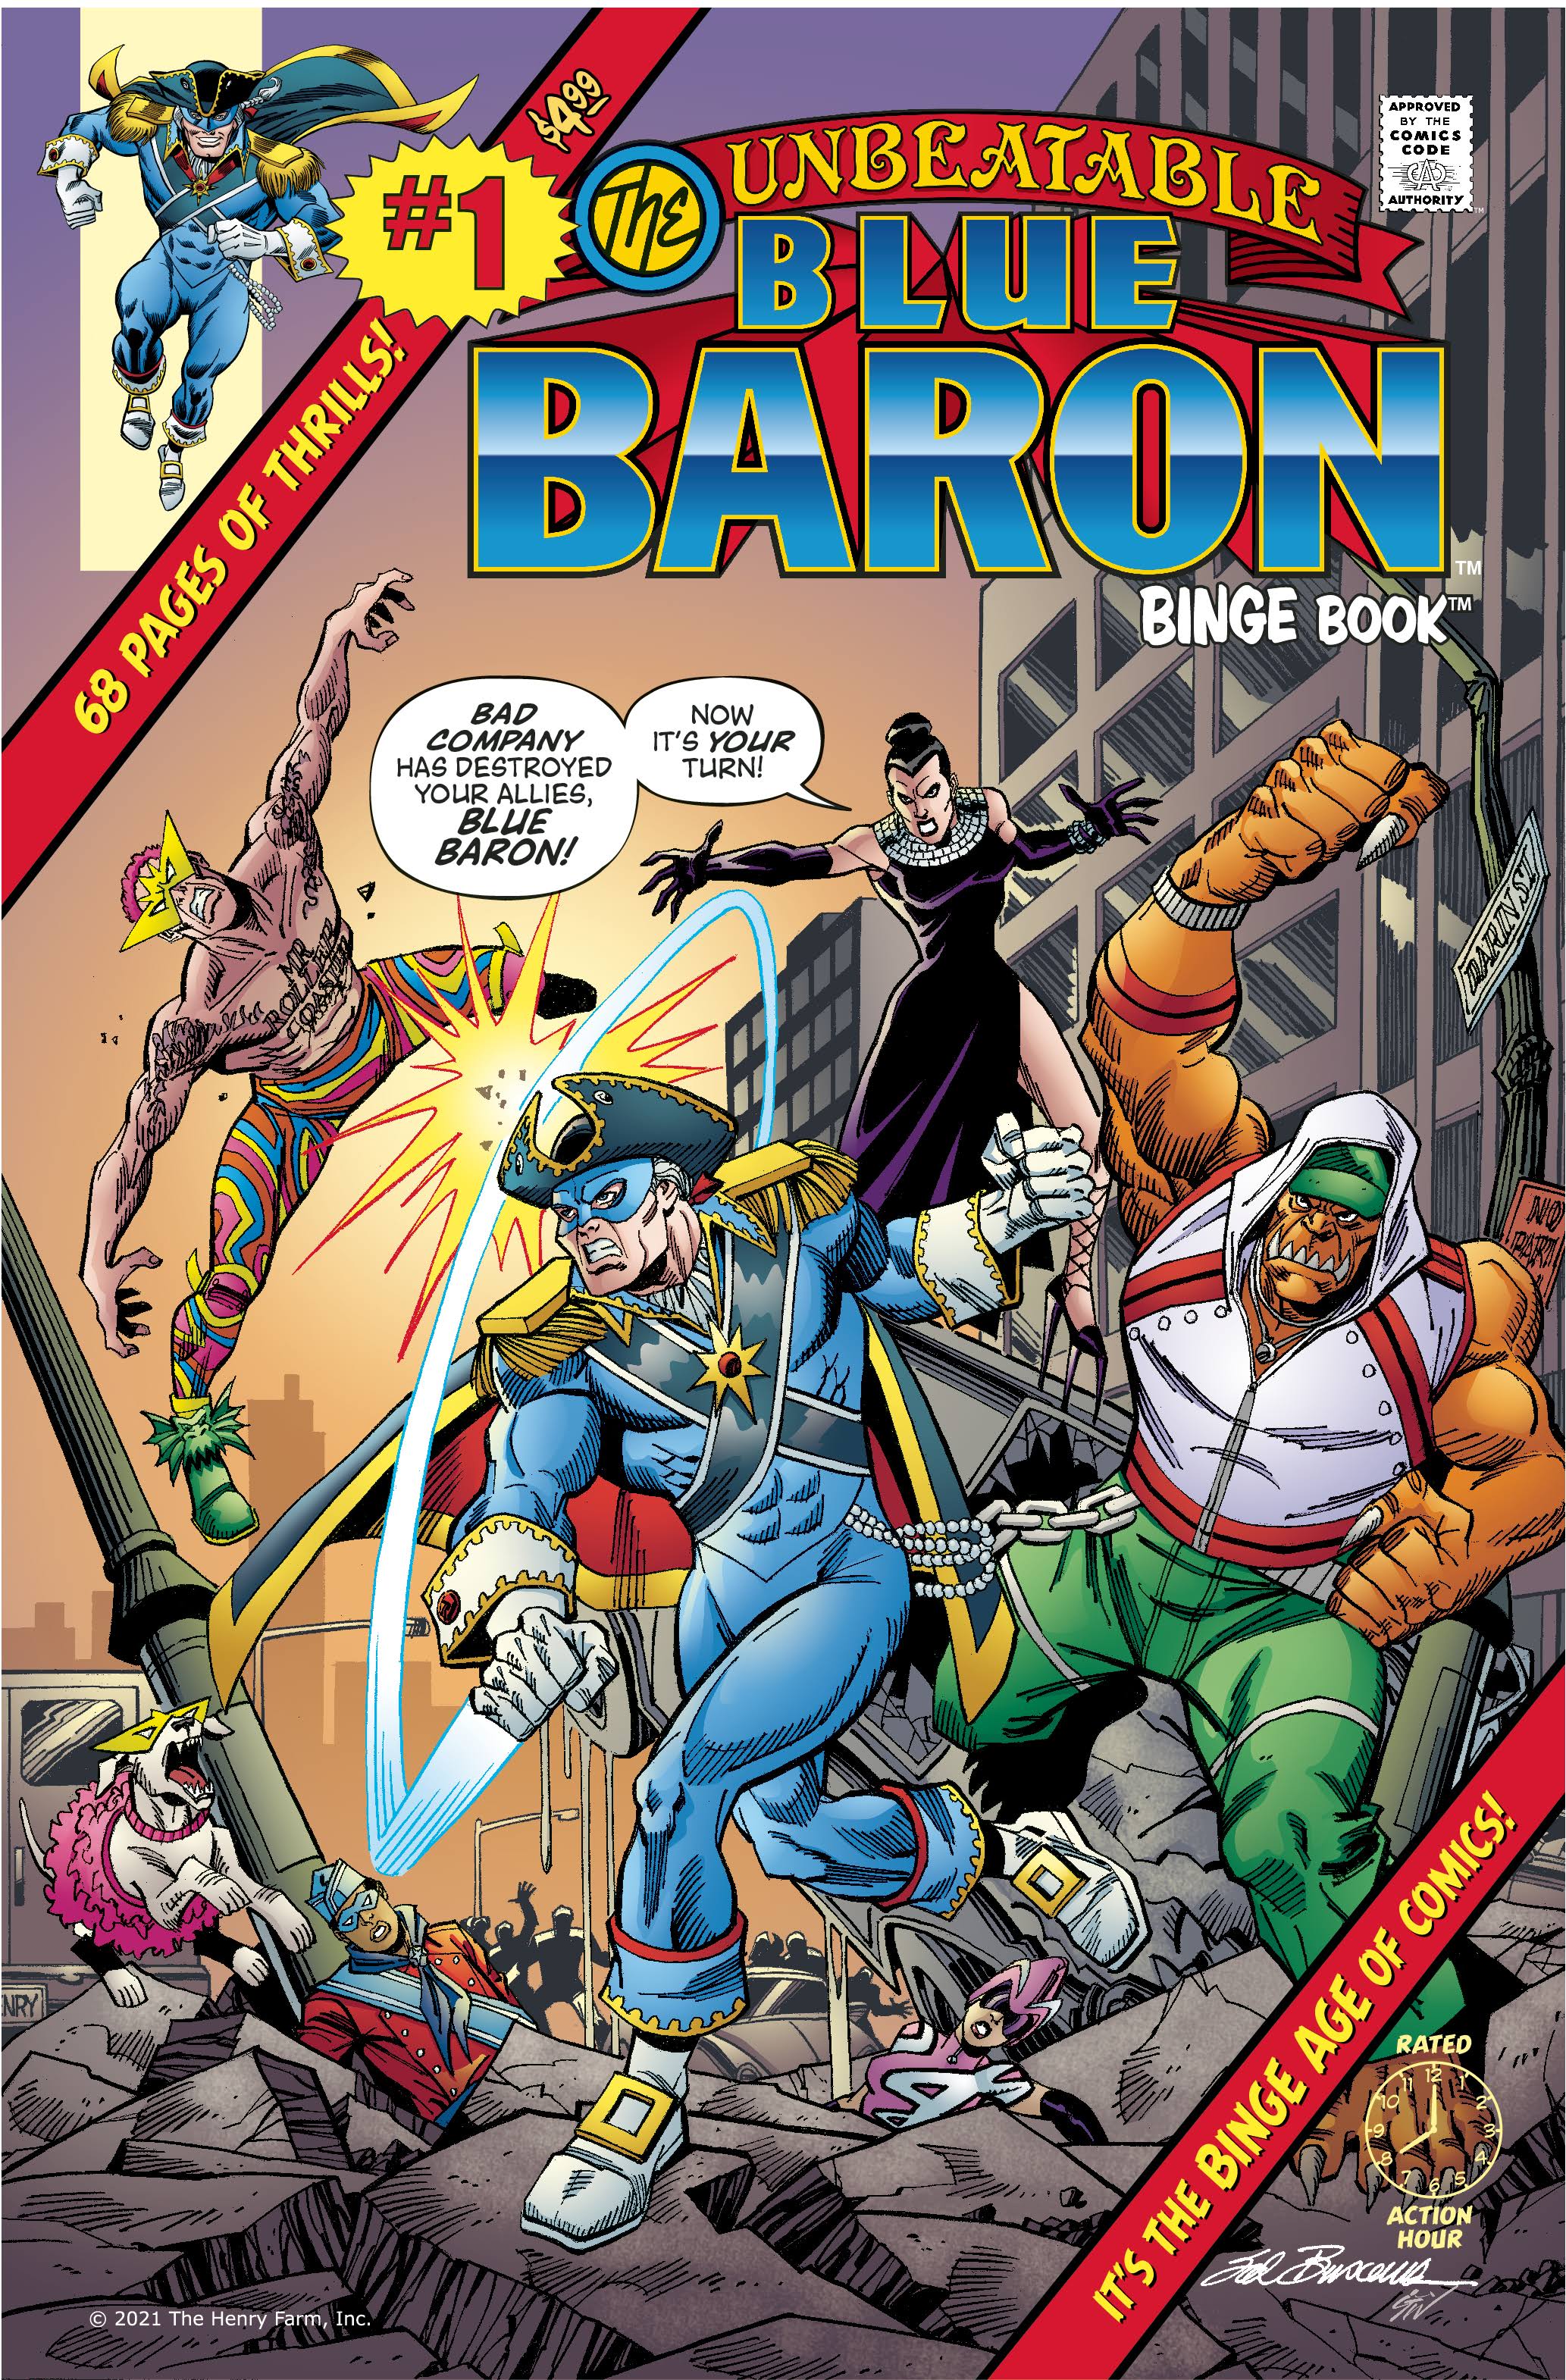 The Blue Baron Binge Book #1: Everything Old Is New Again! [Book]